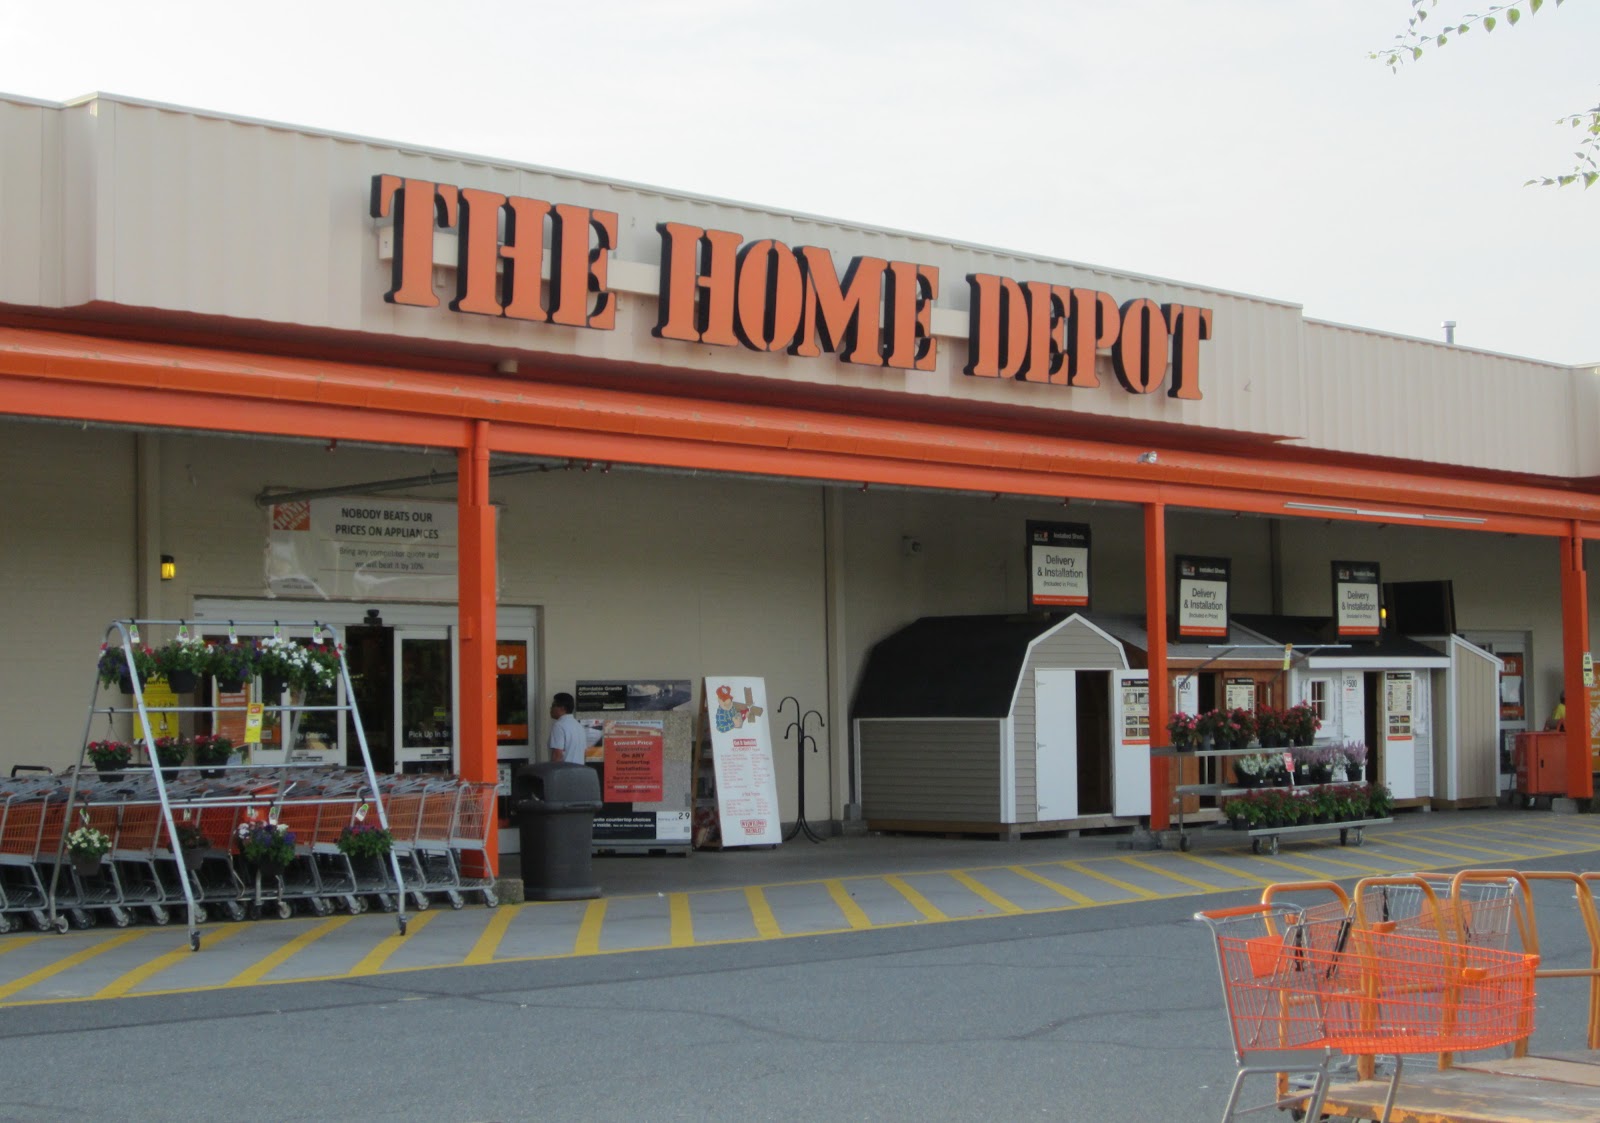 The Home Depot corporate office is aware of the complaintsabout litter 